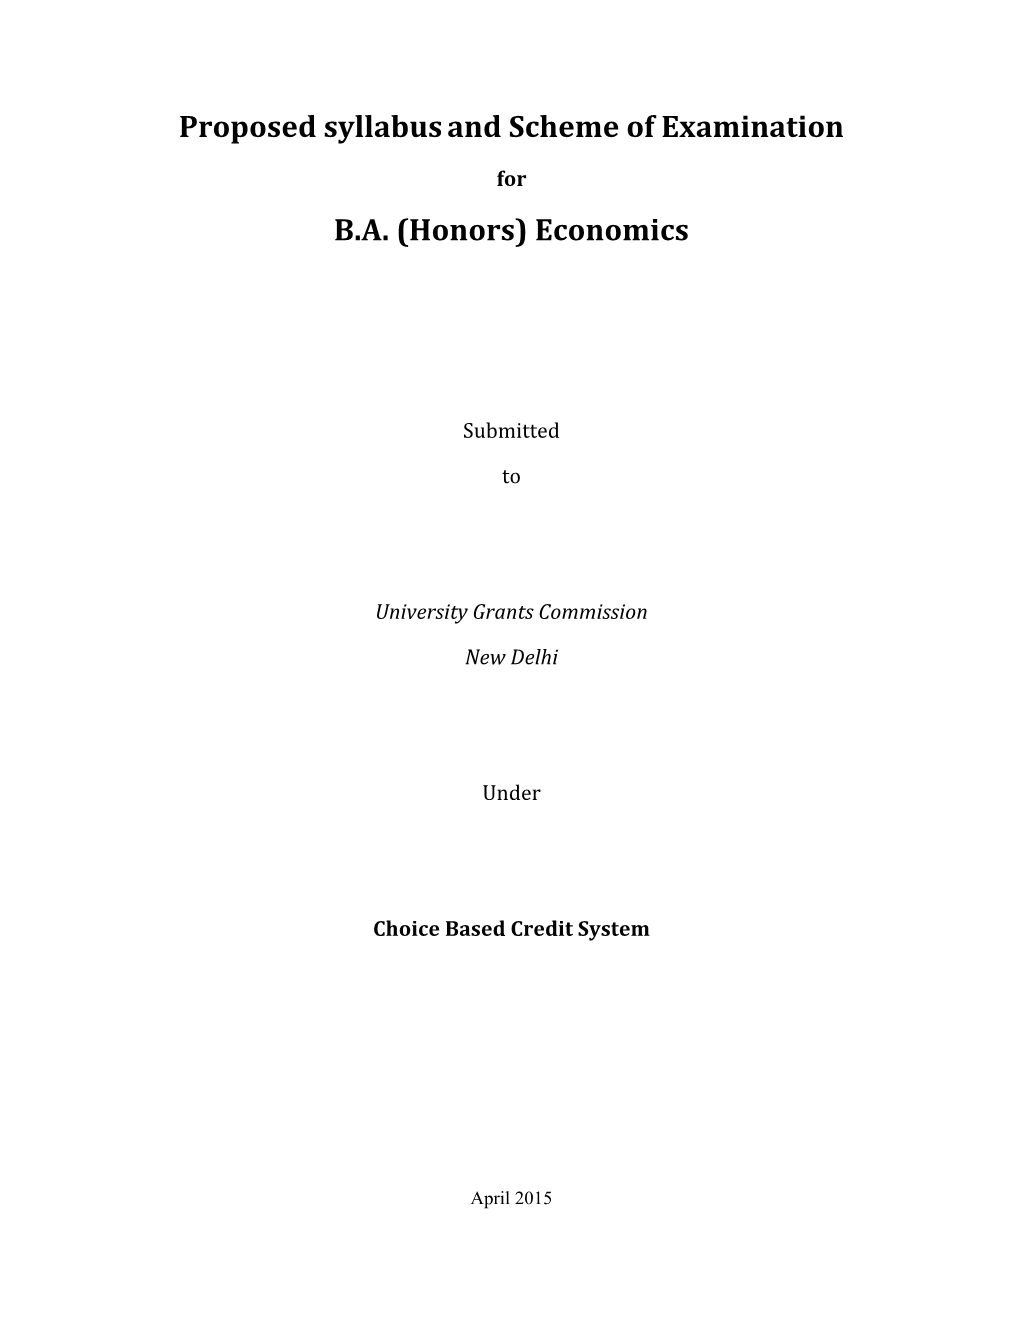 Proposed Syllabusand Scheme of Examination B.A. (Honors) Economics